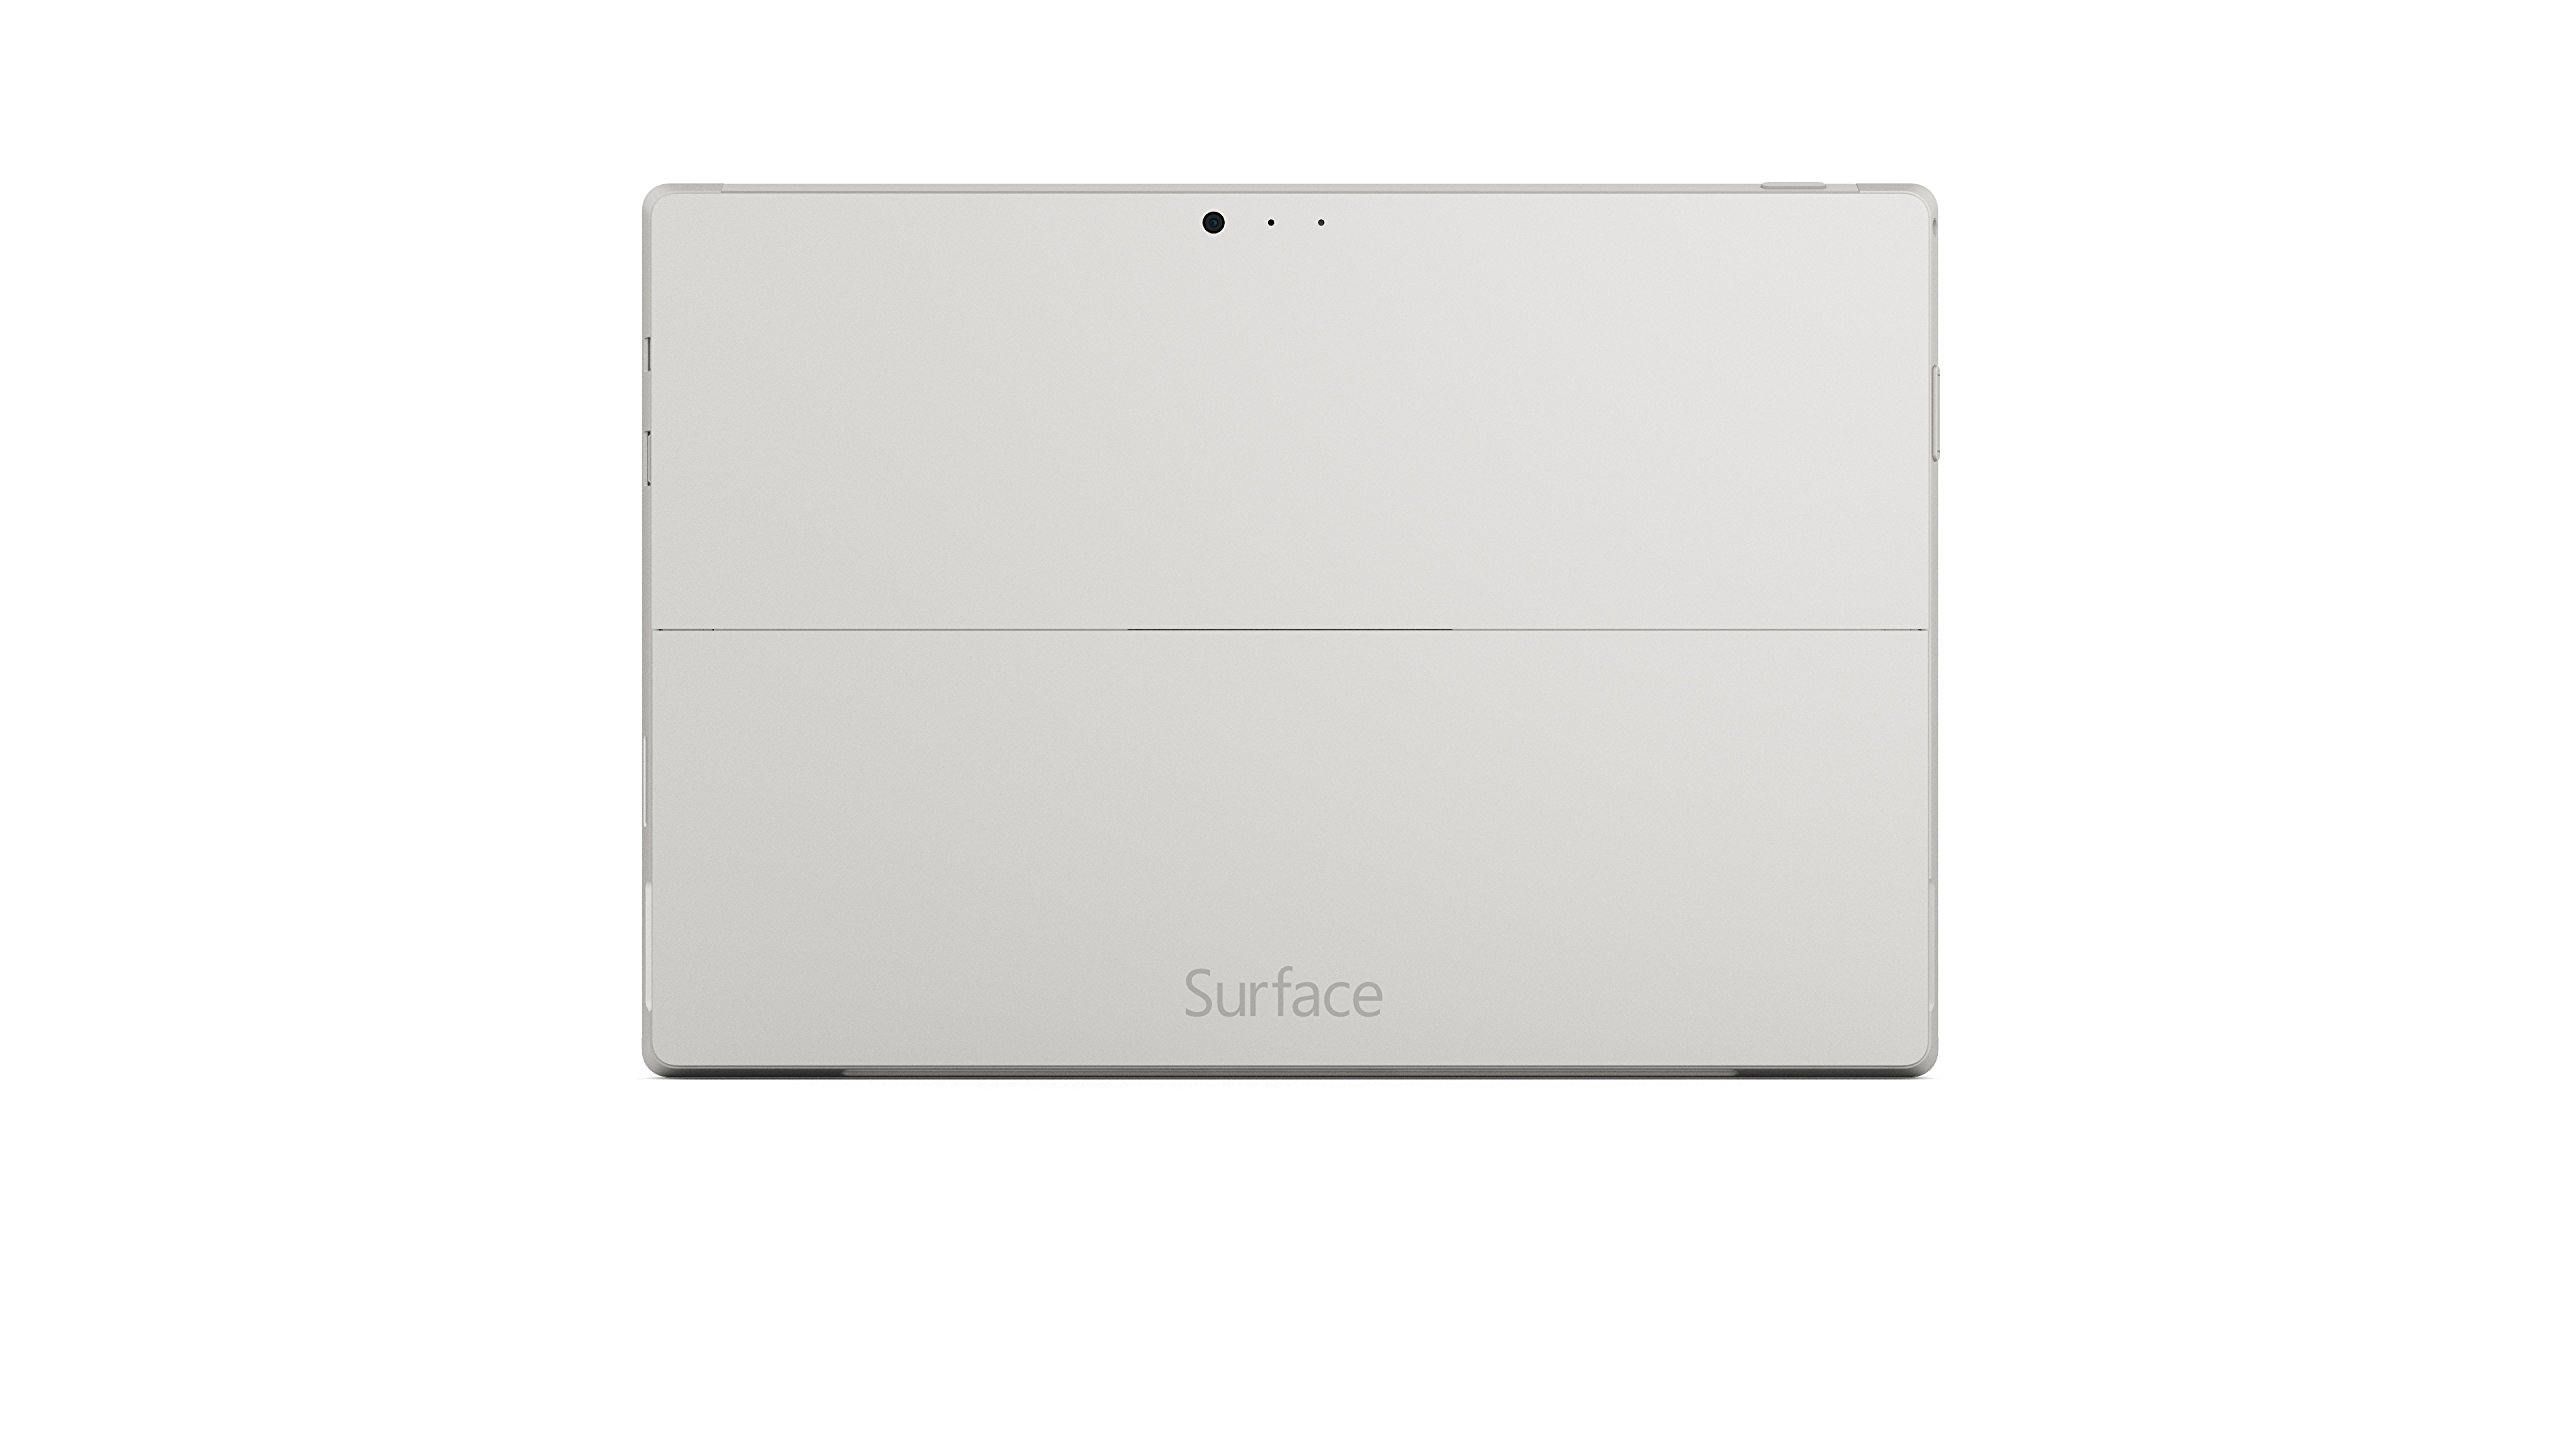 Microsoft Surface Pro 3 MQ2-00001 12-Inch Full HD 128 GB Storage Multi-Touch Tablet (Silver)